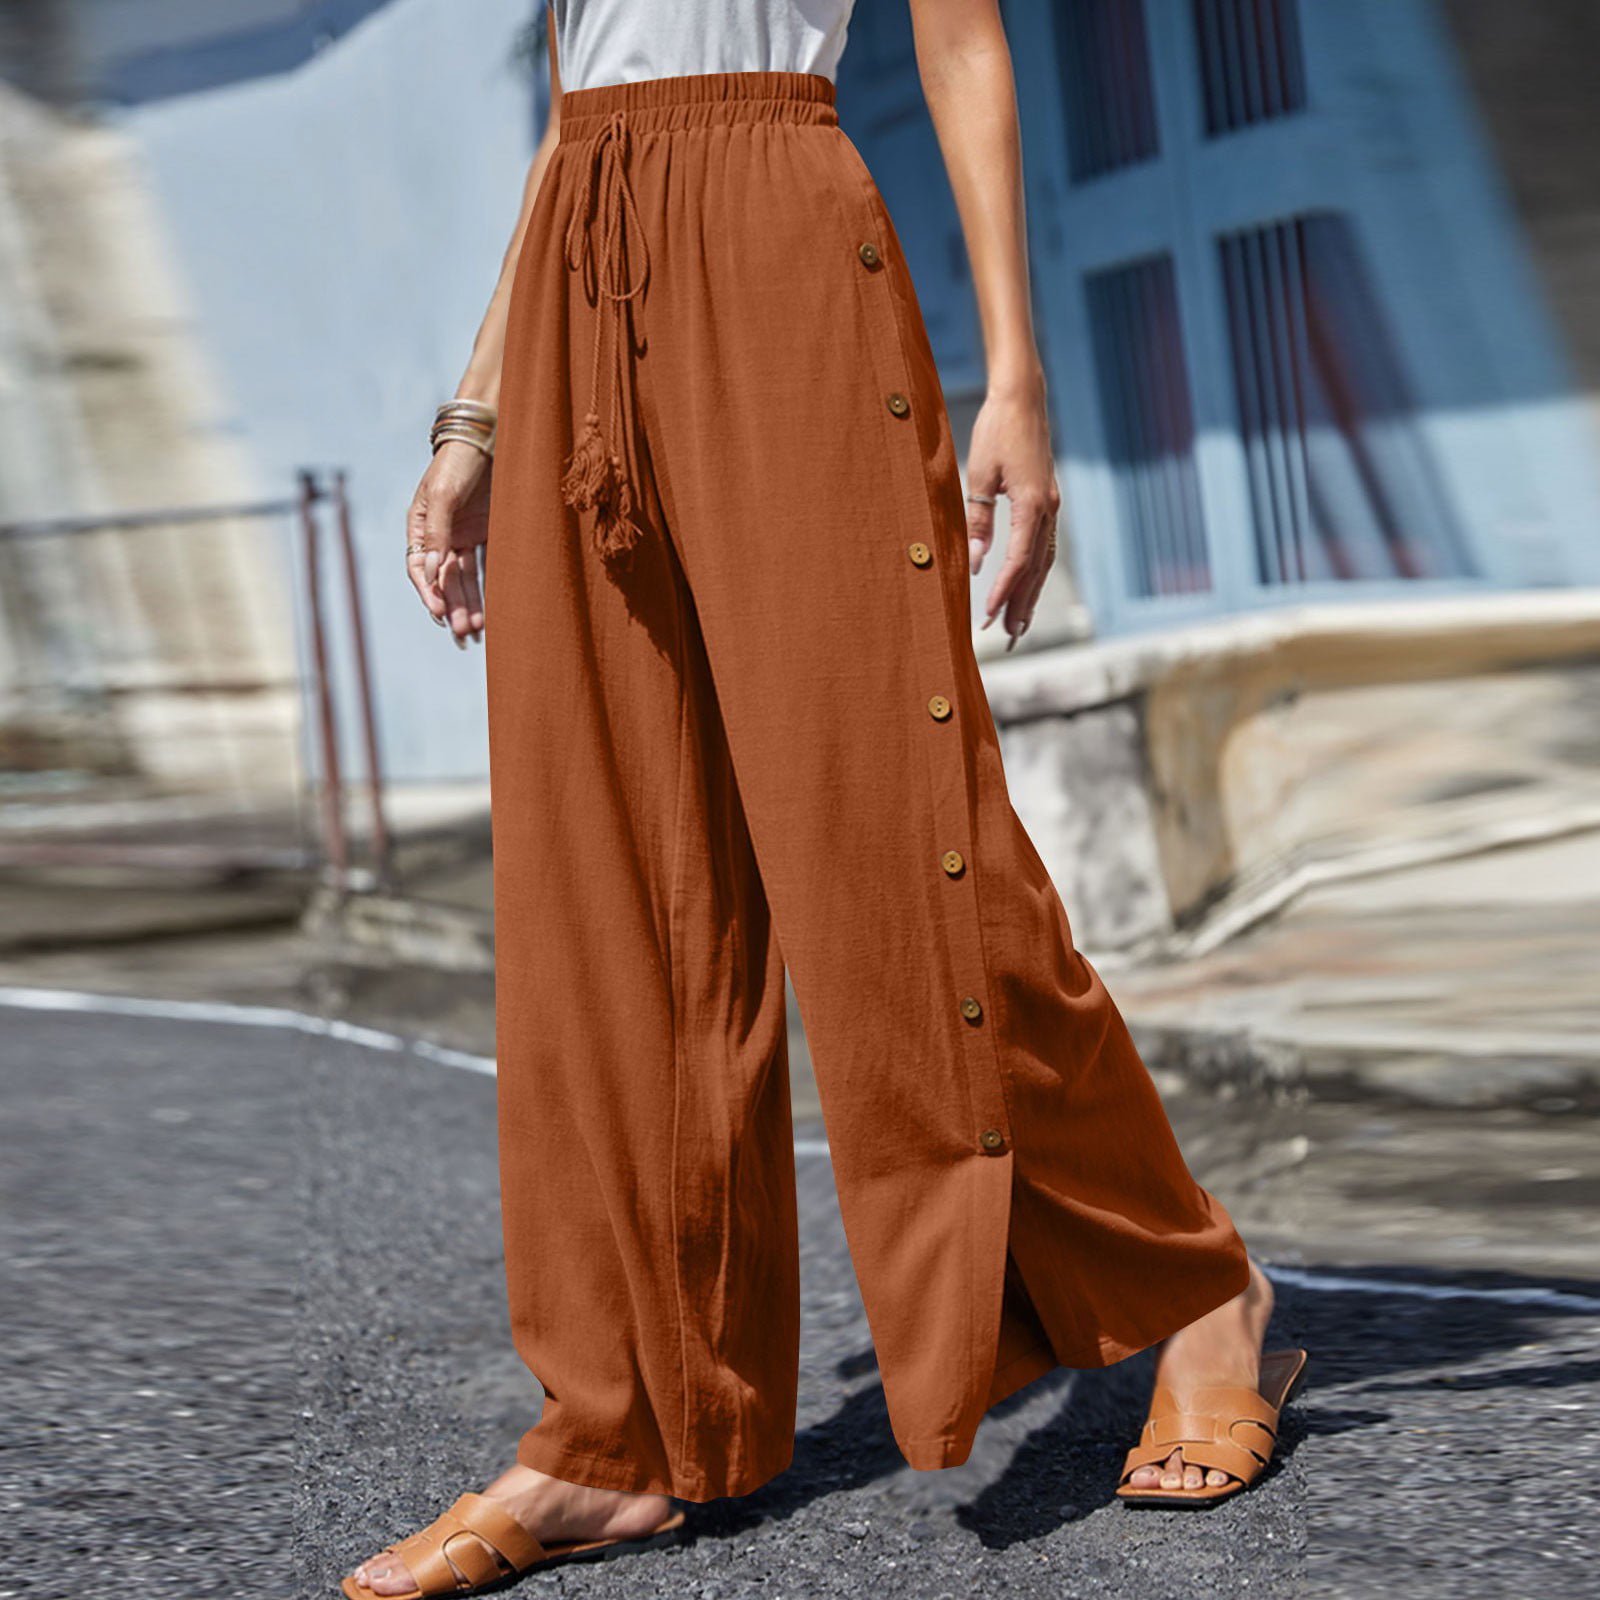 Xysaqa Resort Wear for Women 2023, Women's Casual High Waist Wide Leg Comfy  Pants Elastic Waisted Loose Fit Trousers 